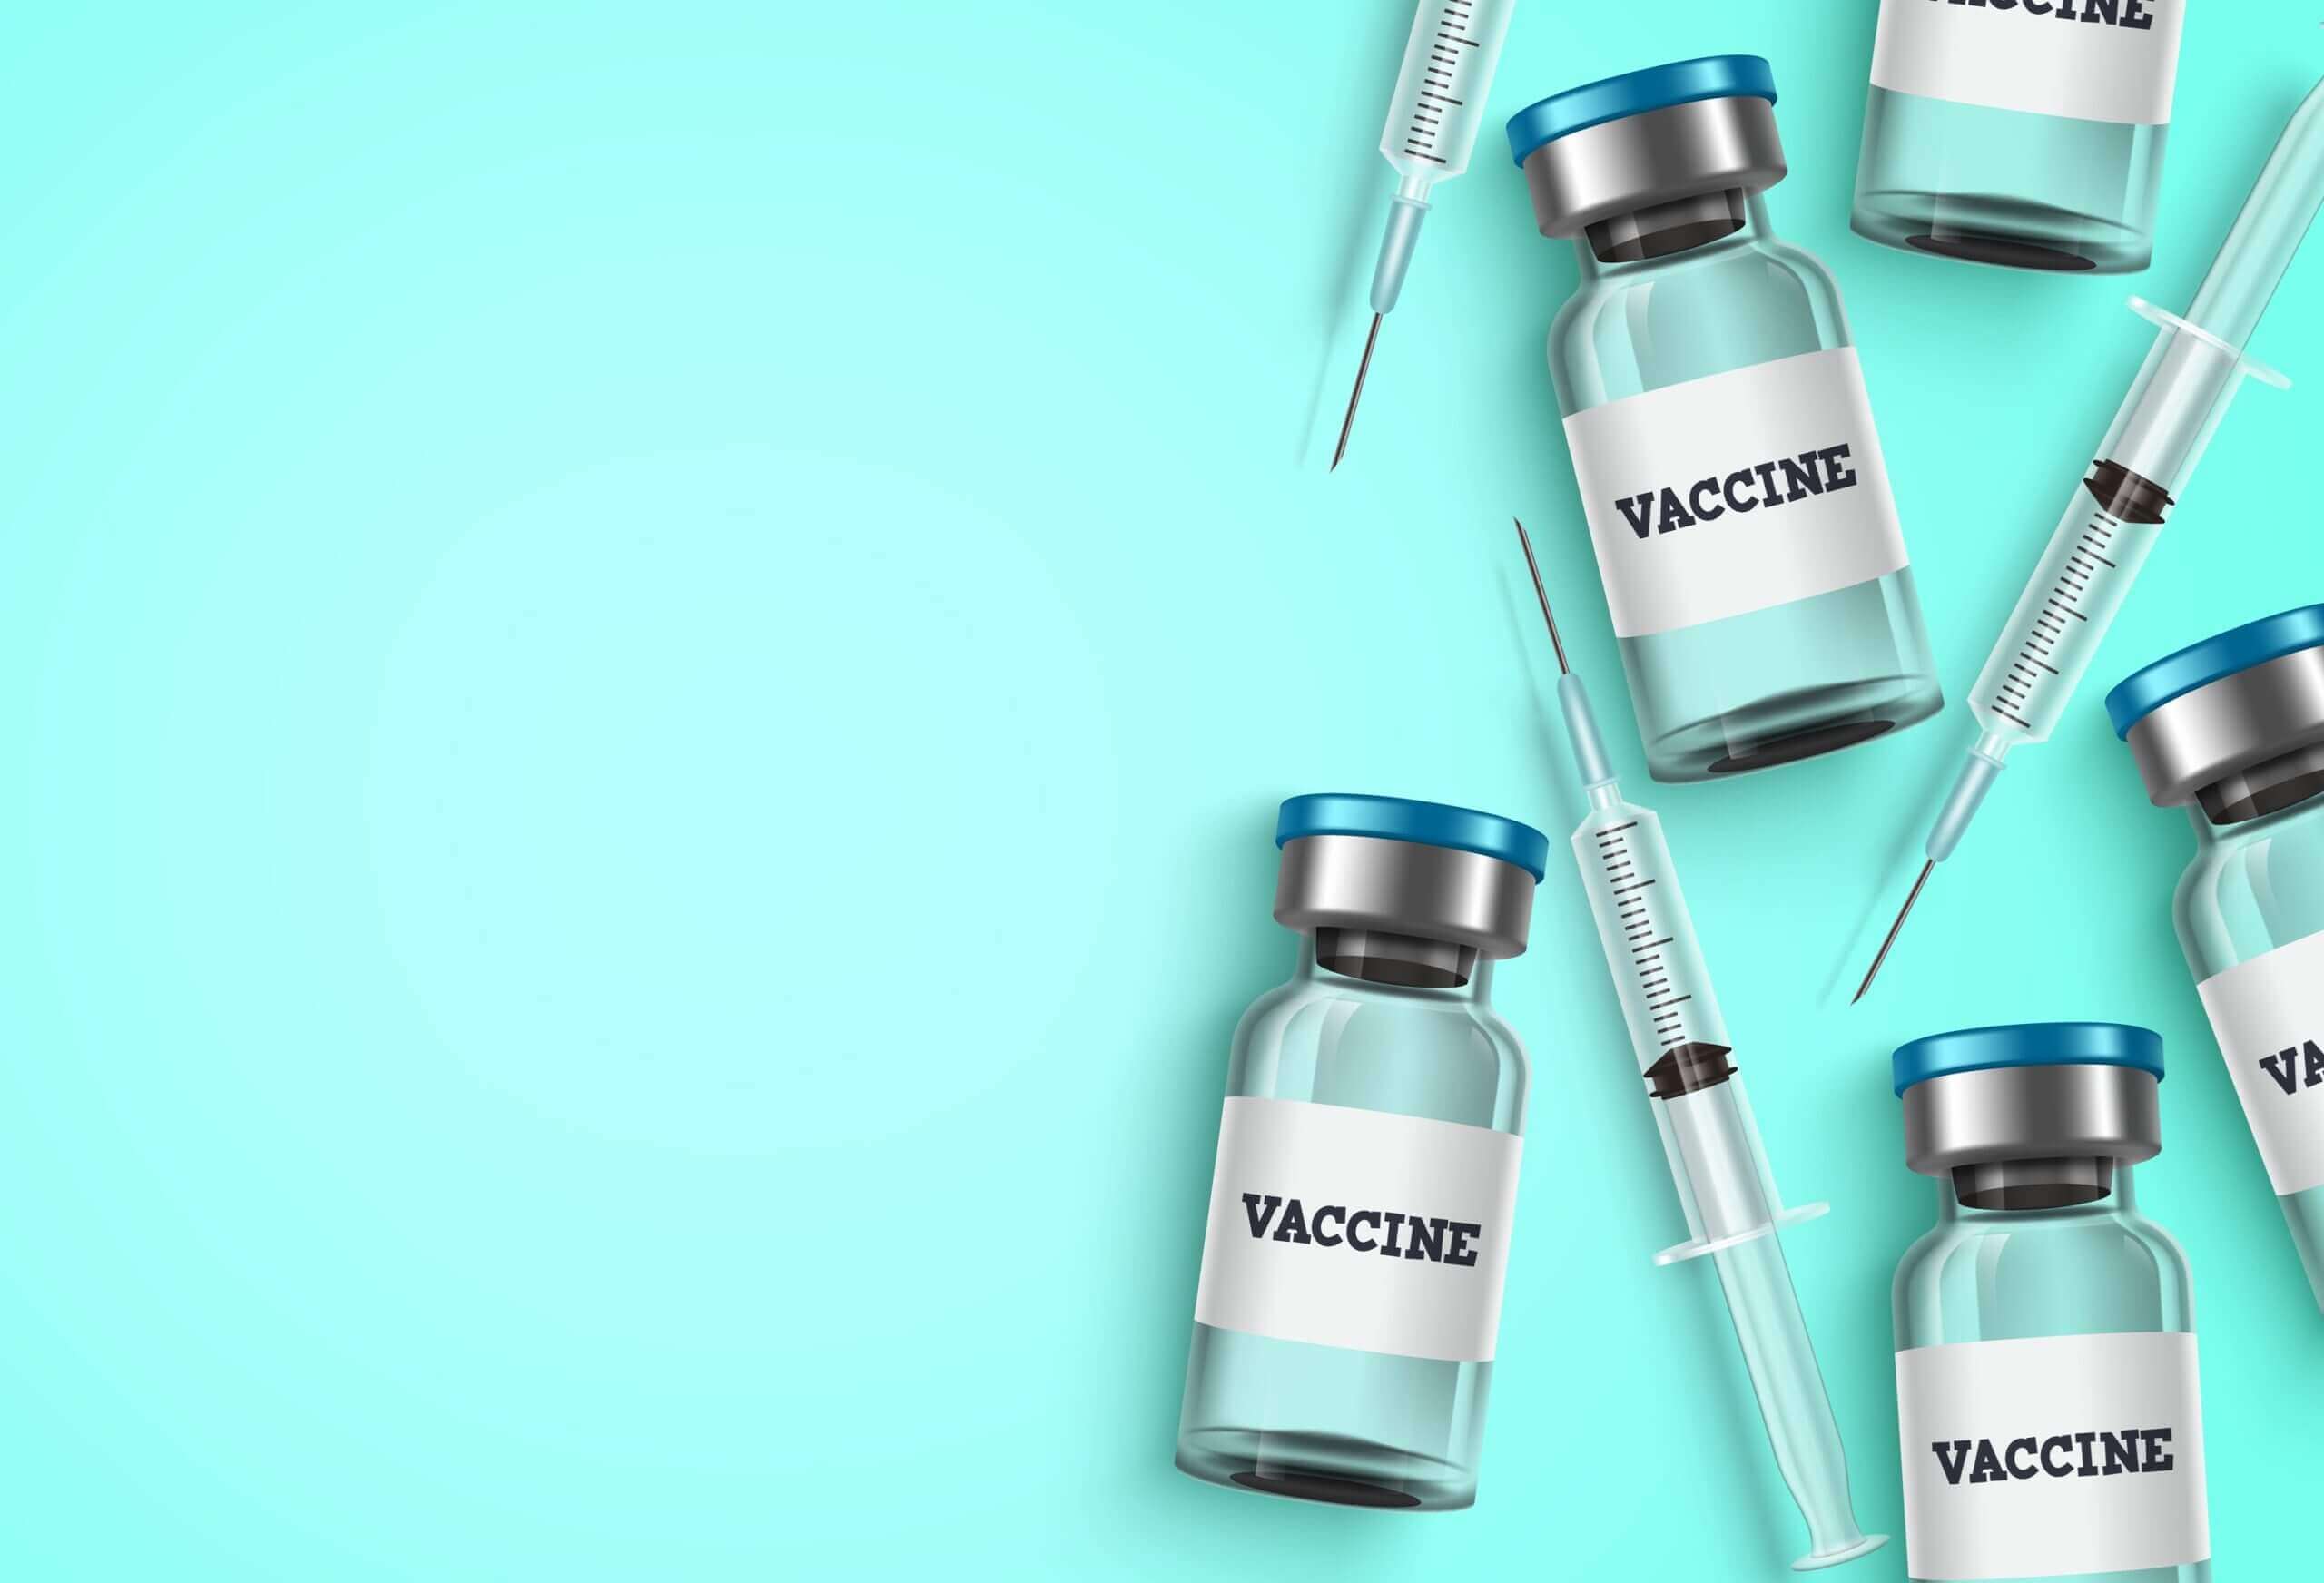 When can I get the Covid-19 Vaccine? - Image